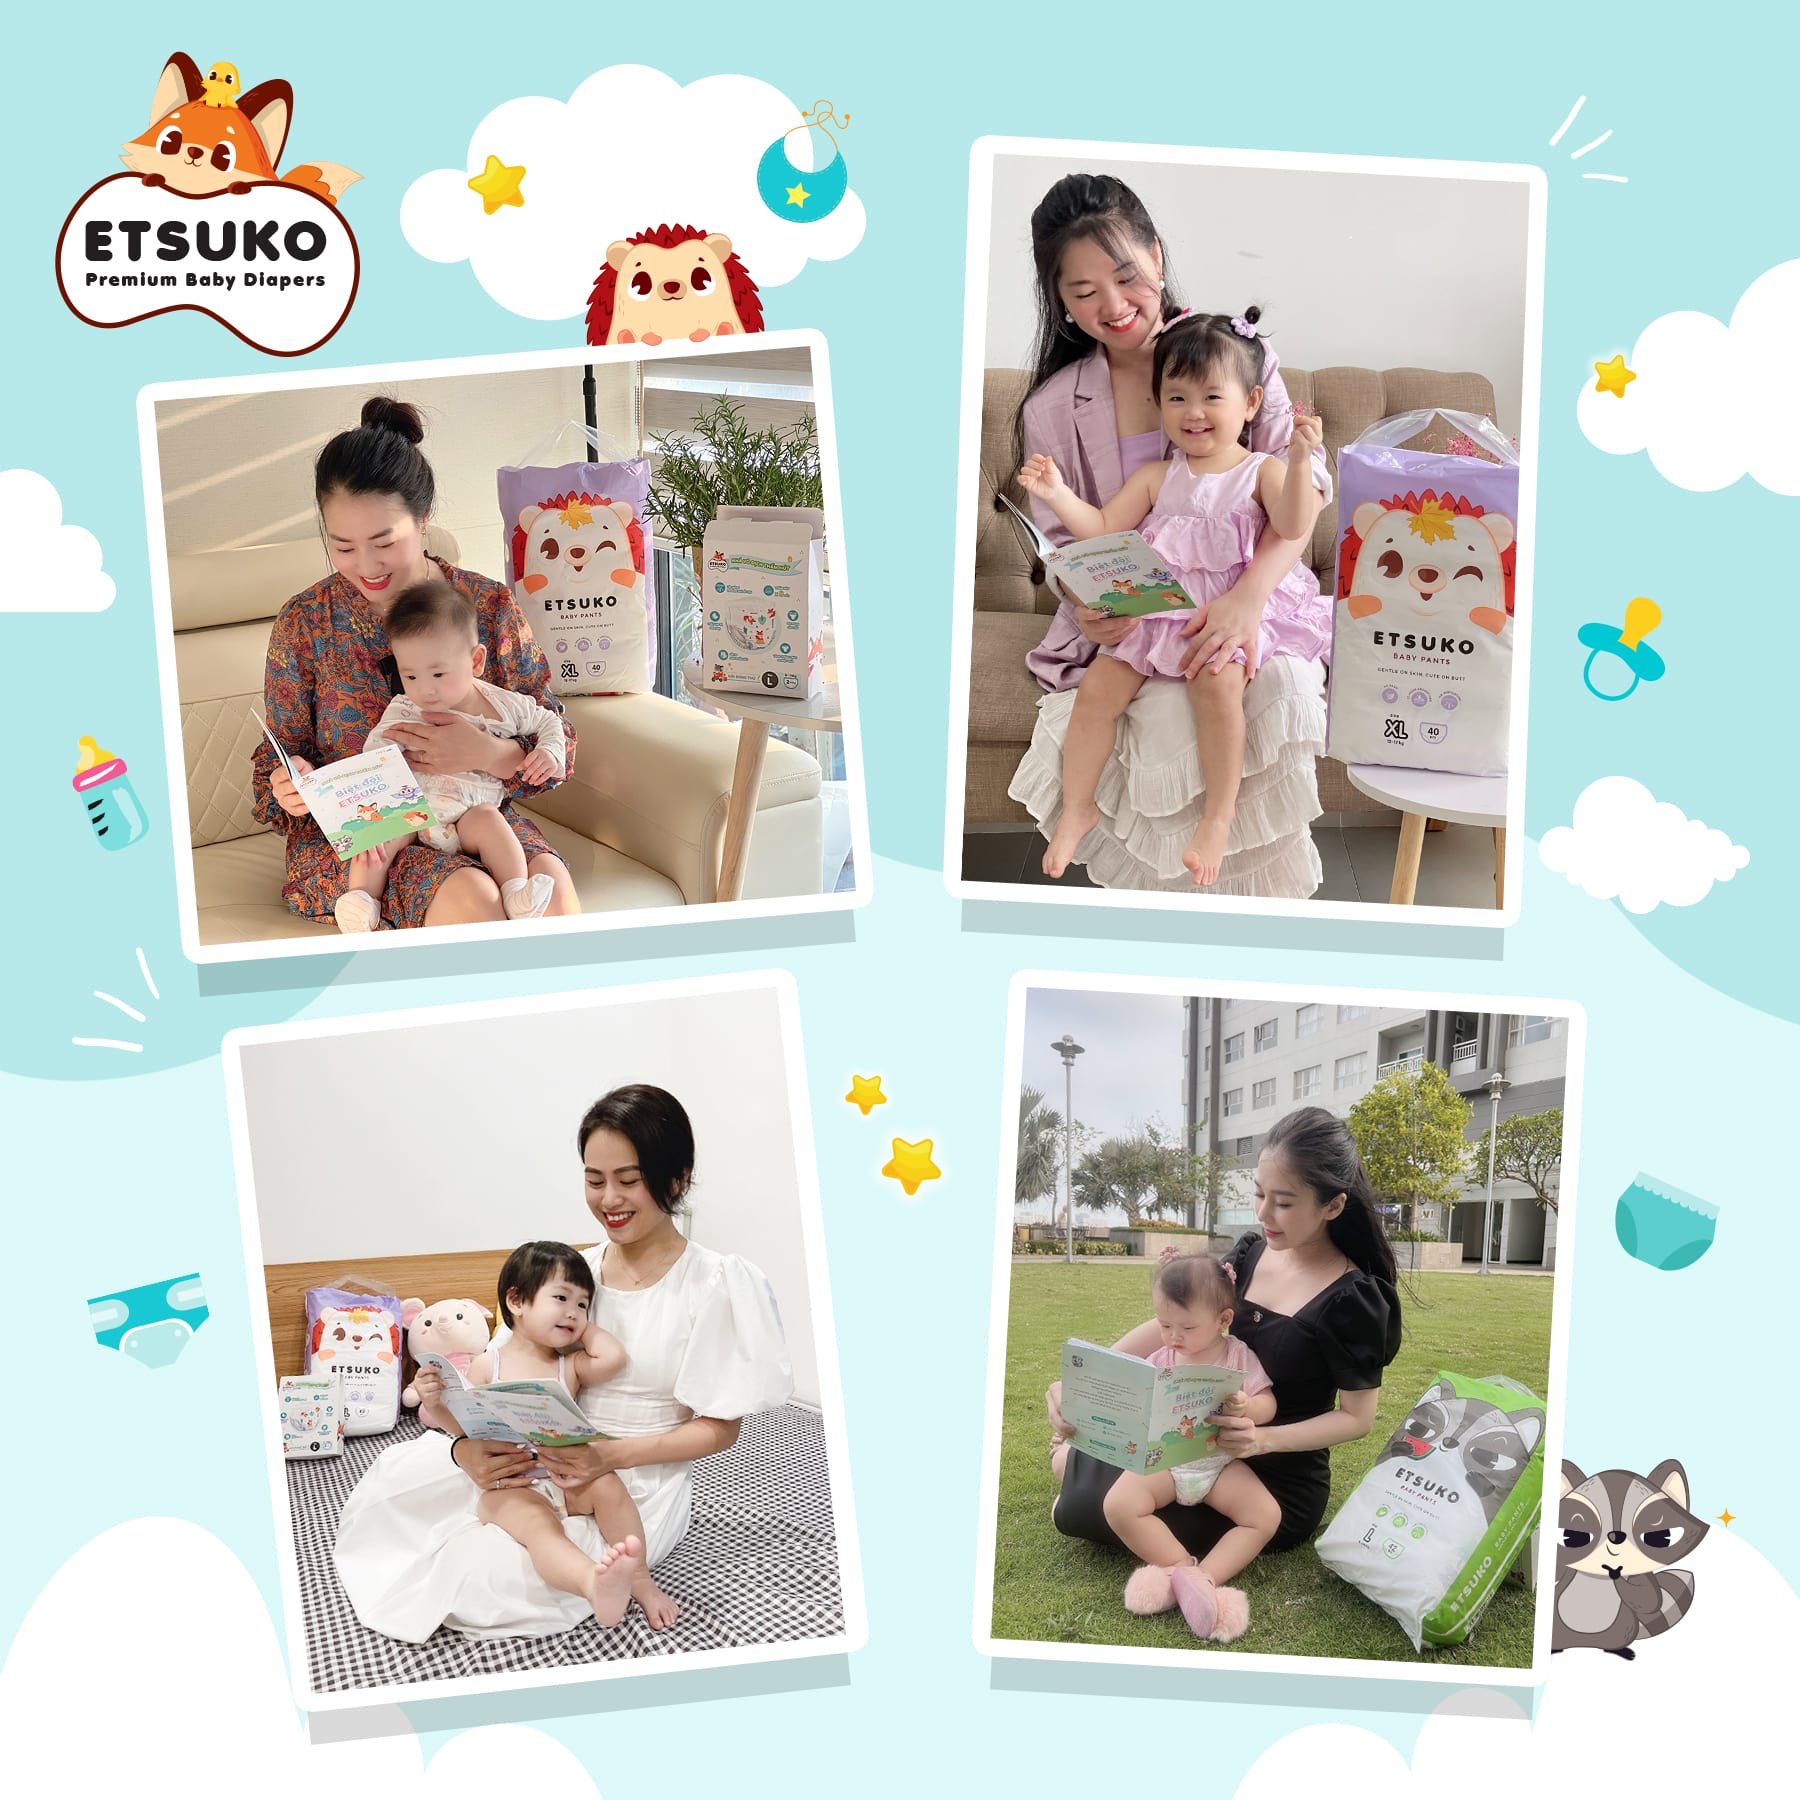 ETSUKO diapers officially entered the Vietnamese market with great deals - Photo 3.